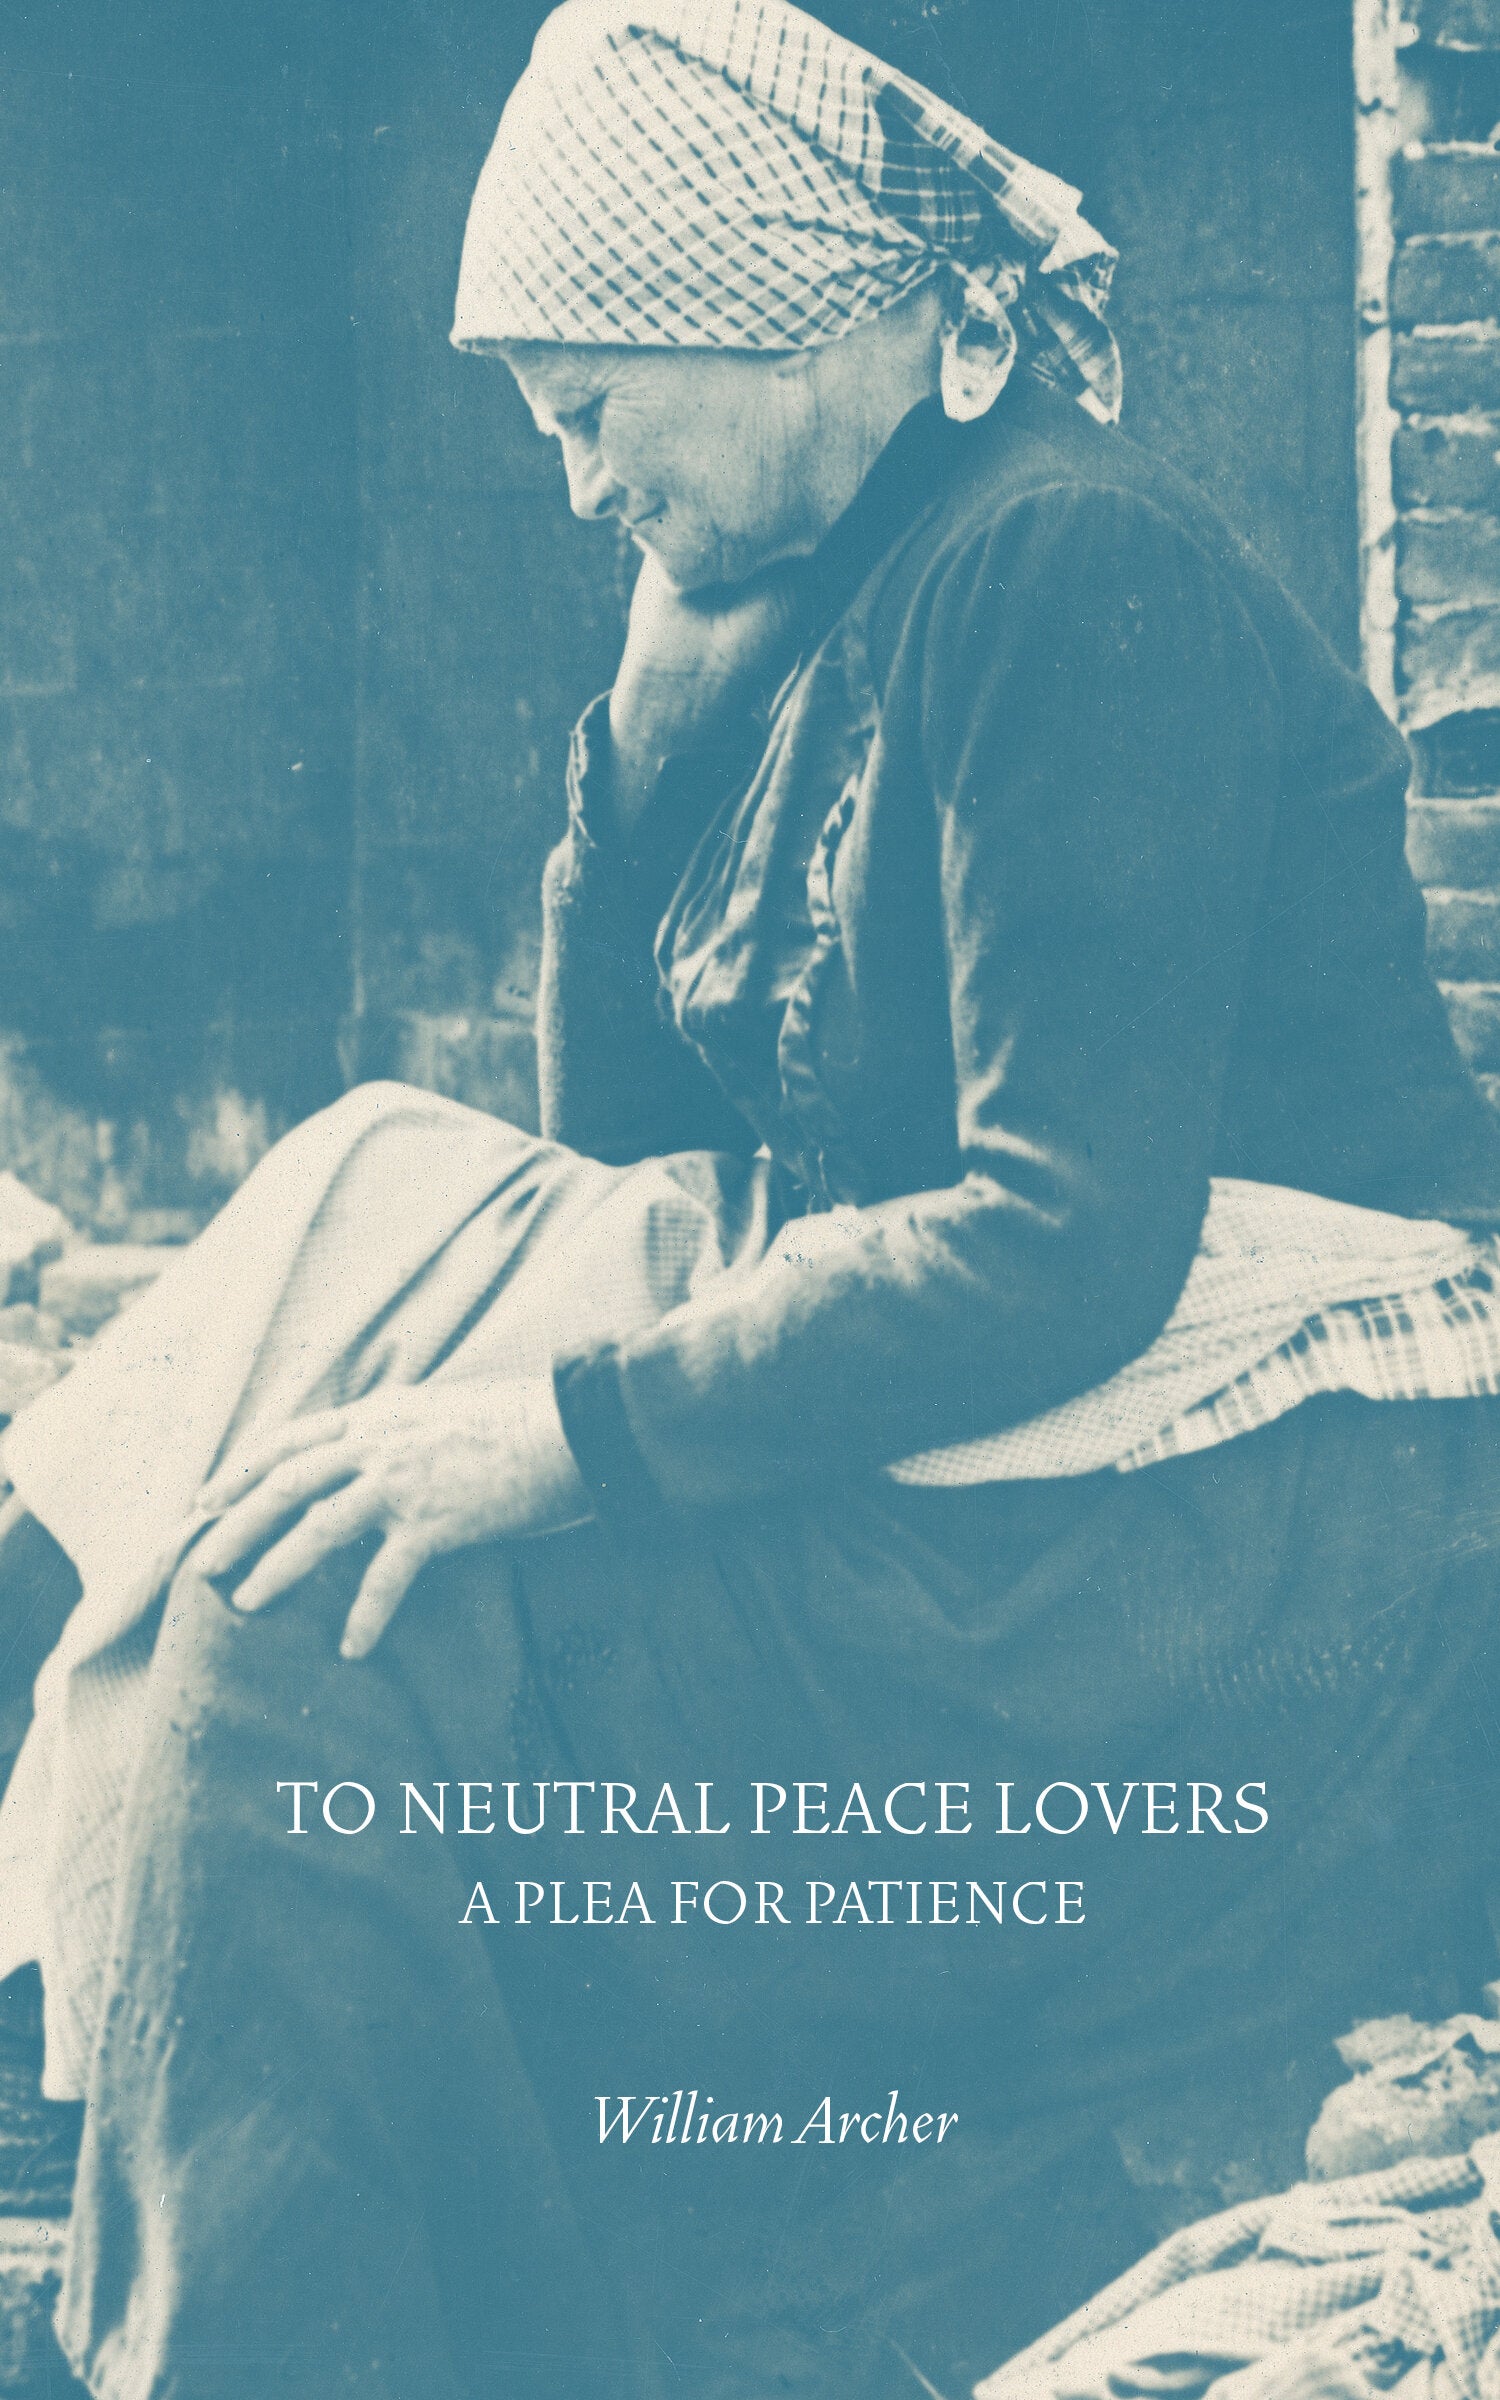 To Neutral Peace Lovers